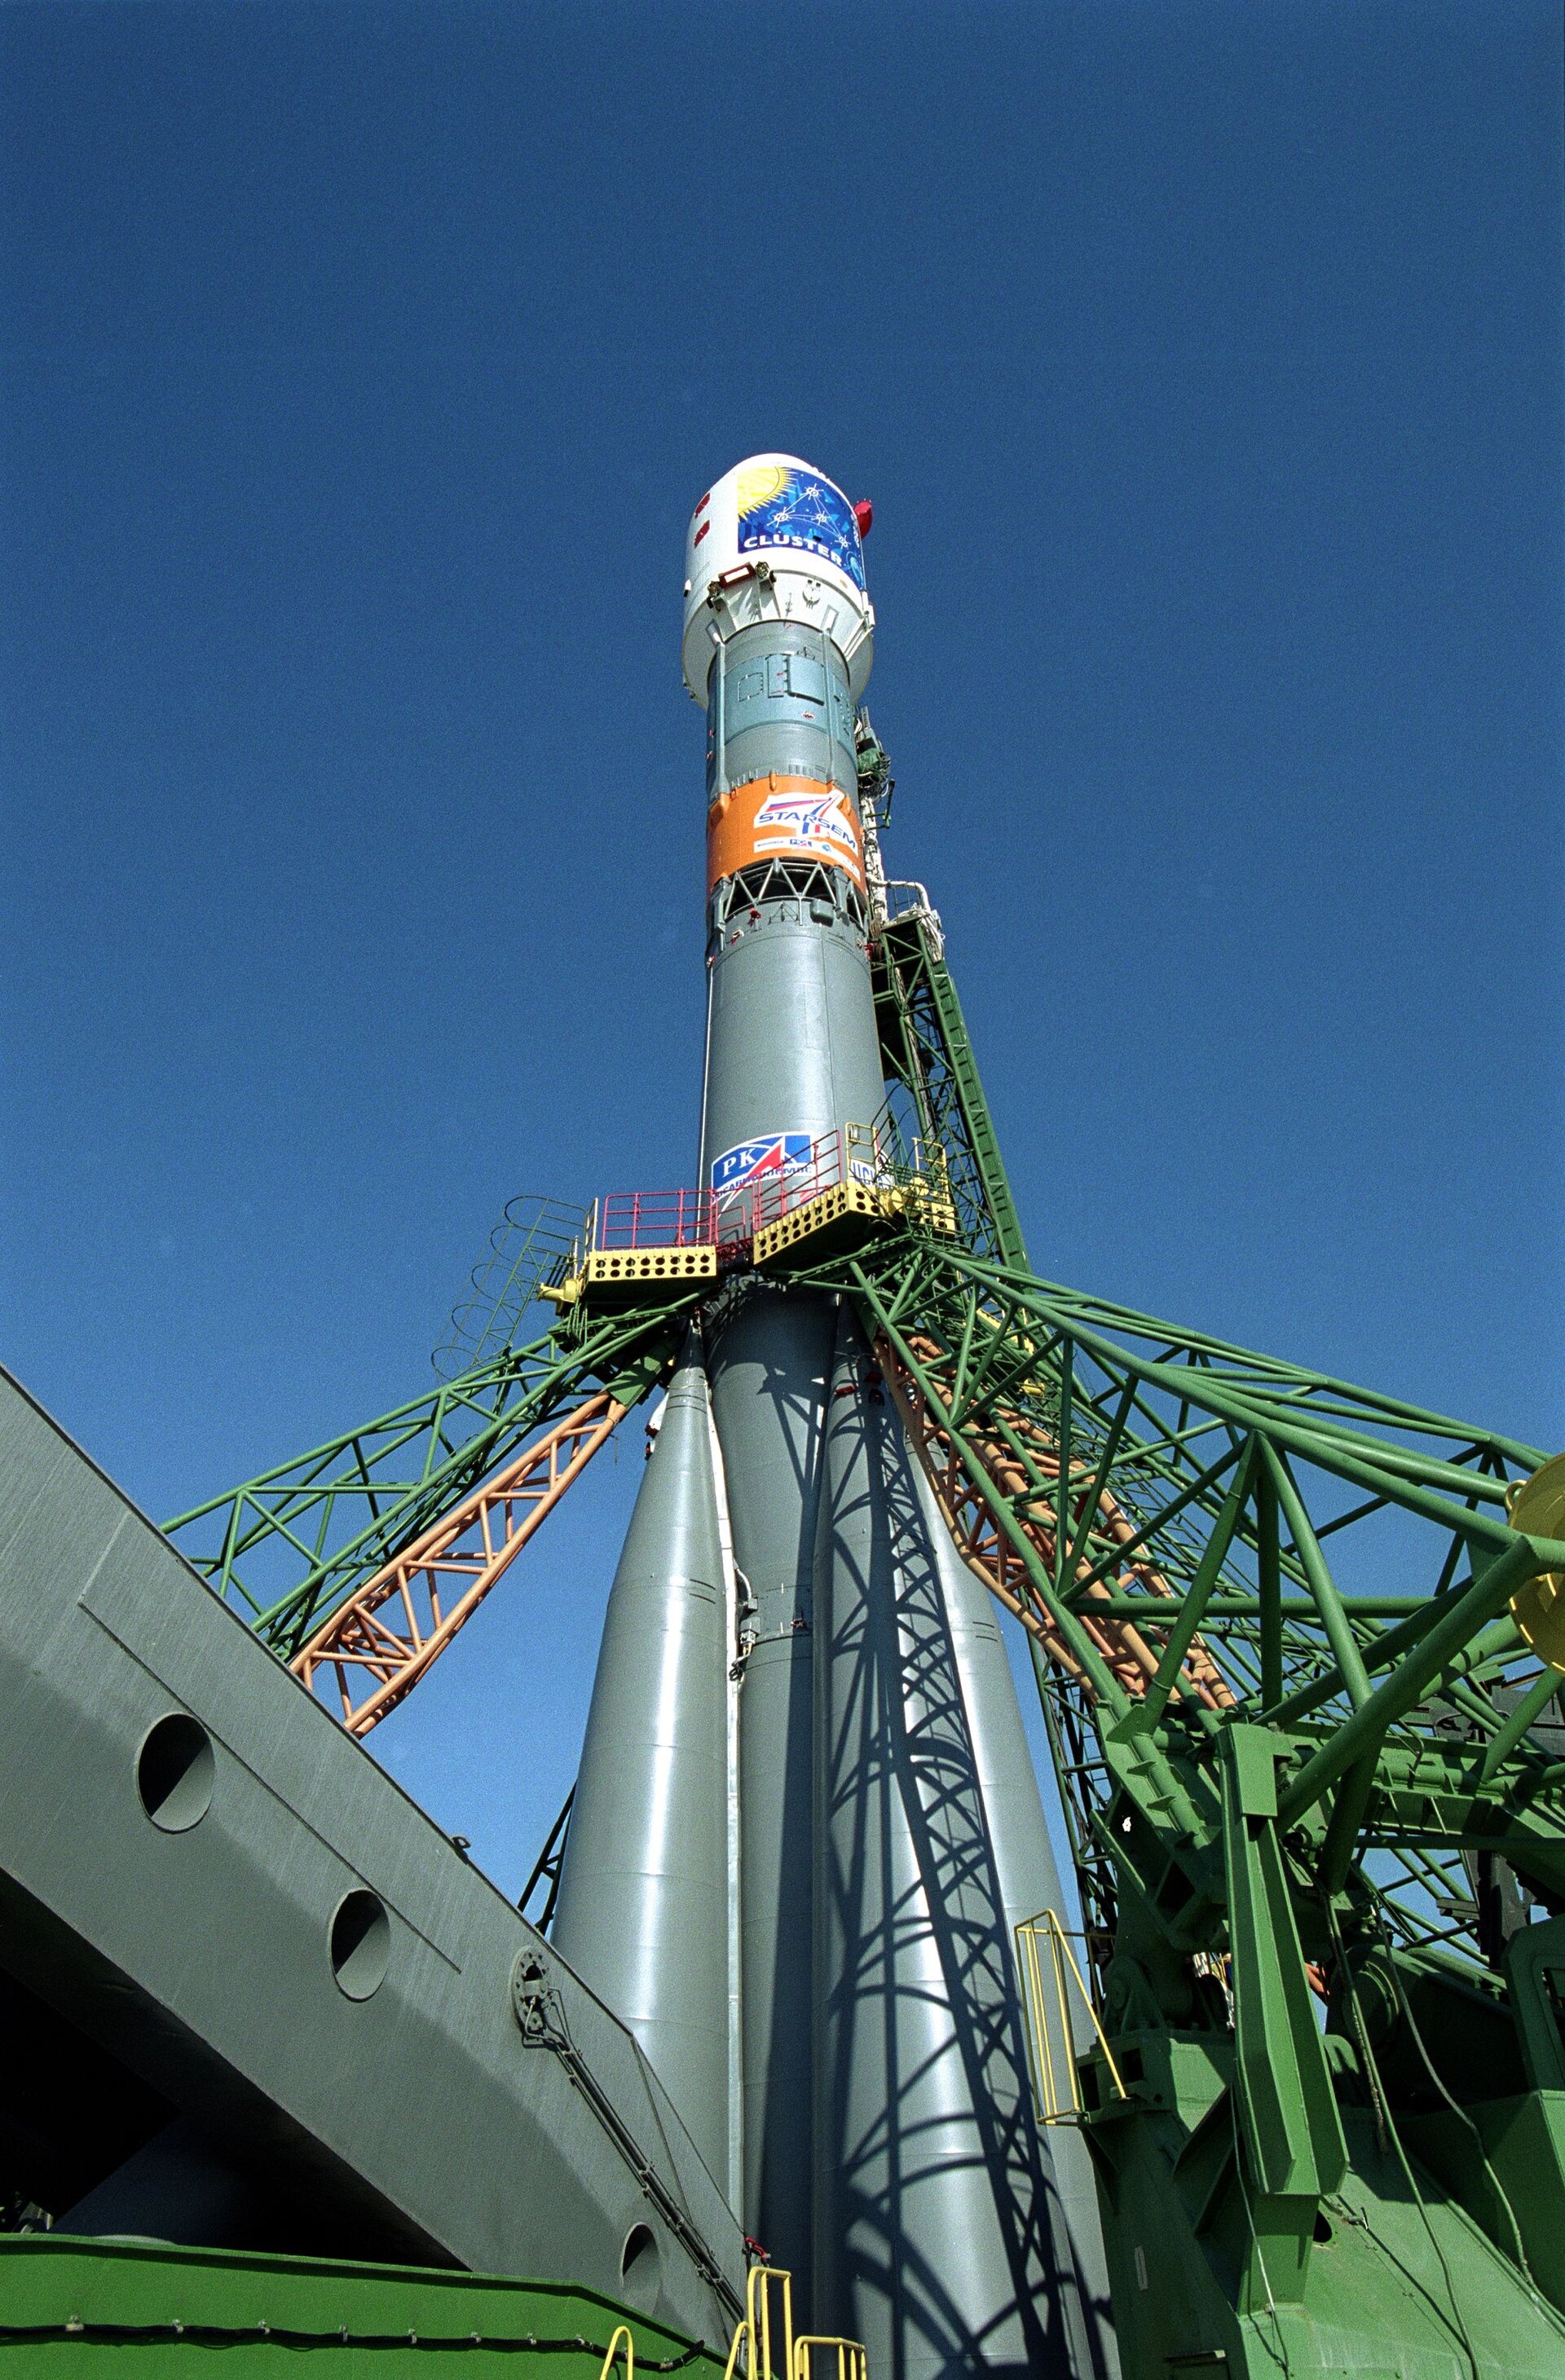 Soyuz launcher on the launch pad